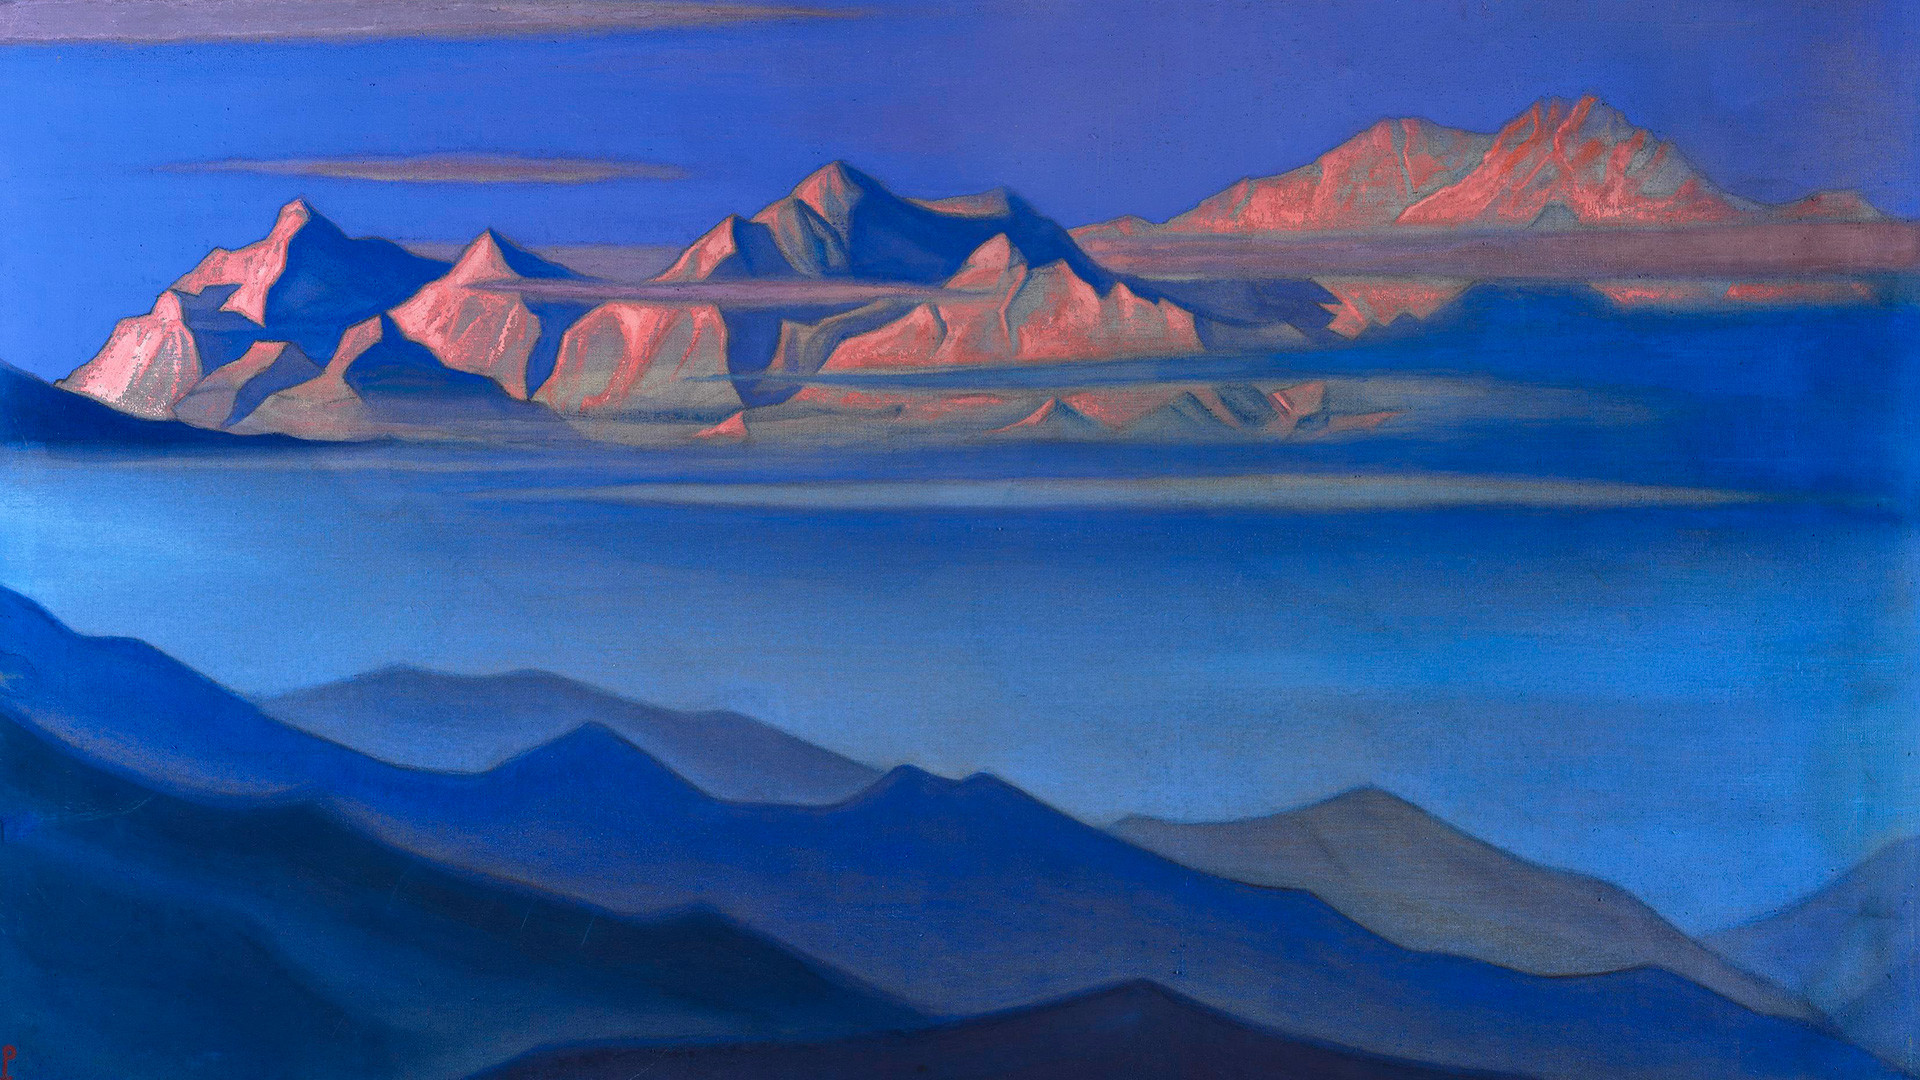 Painting by Nicholas Roerich